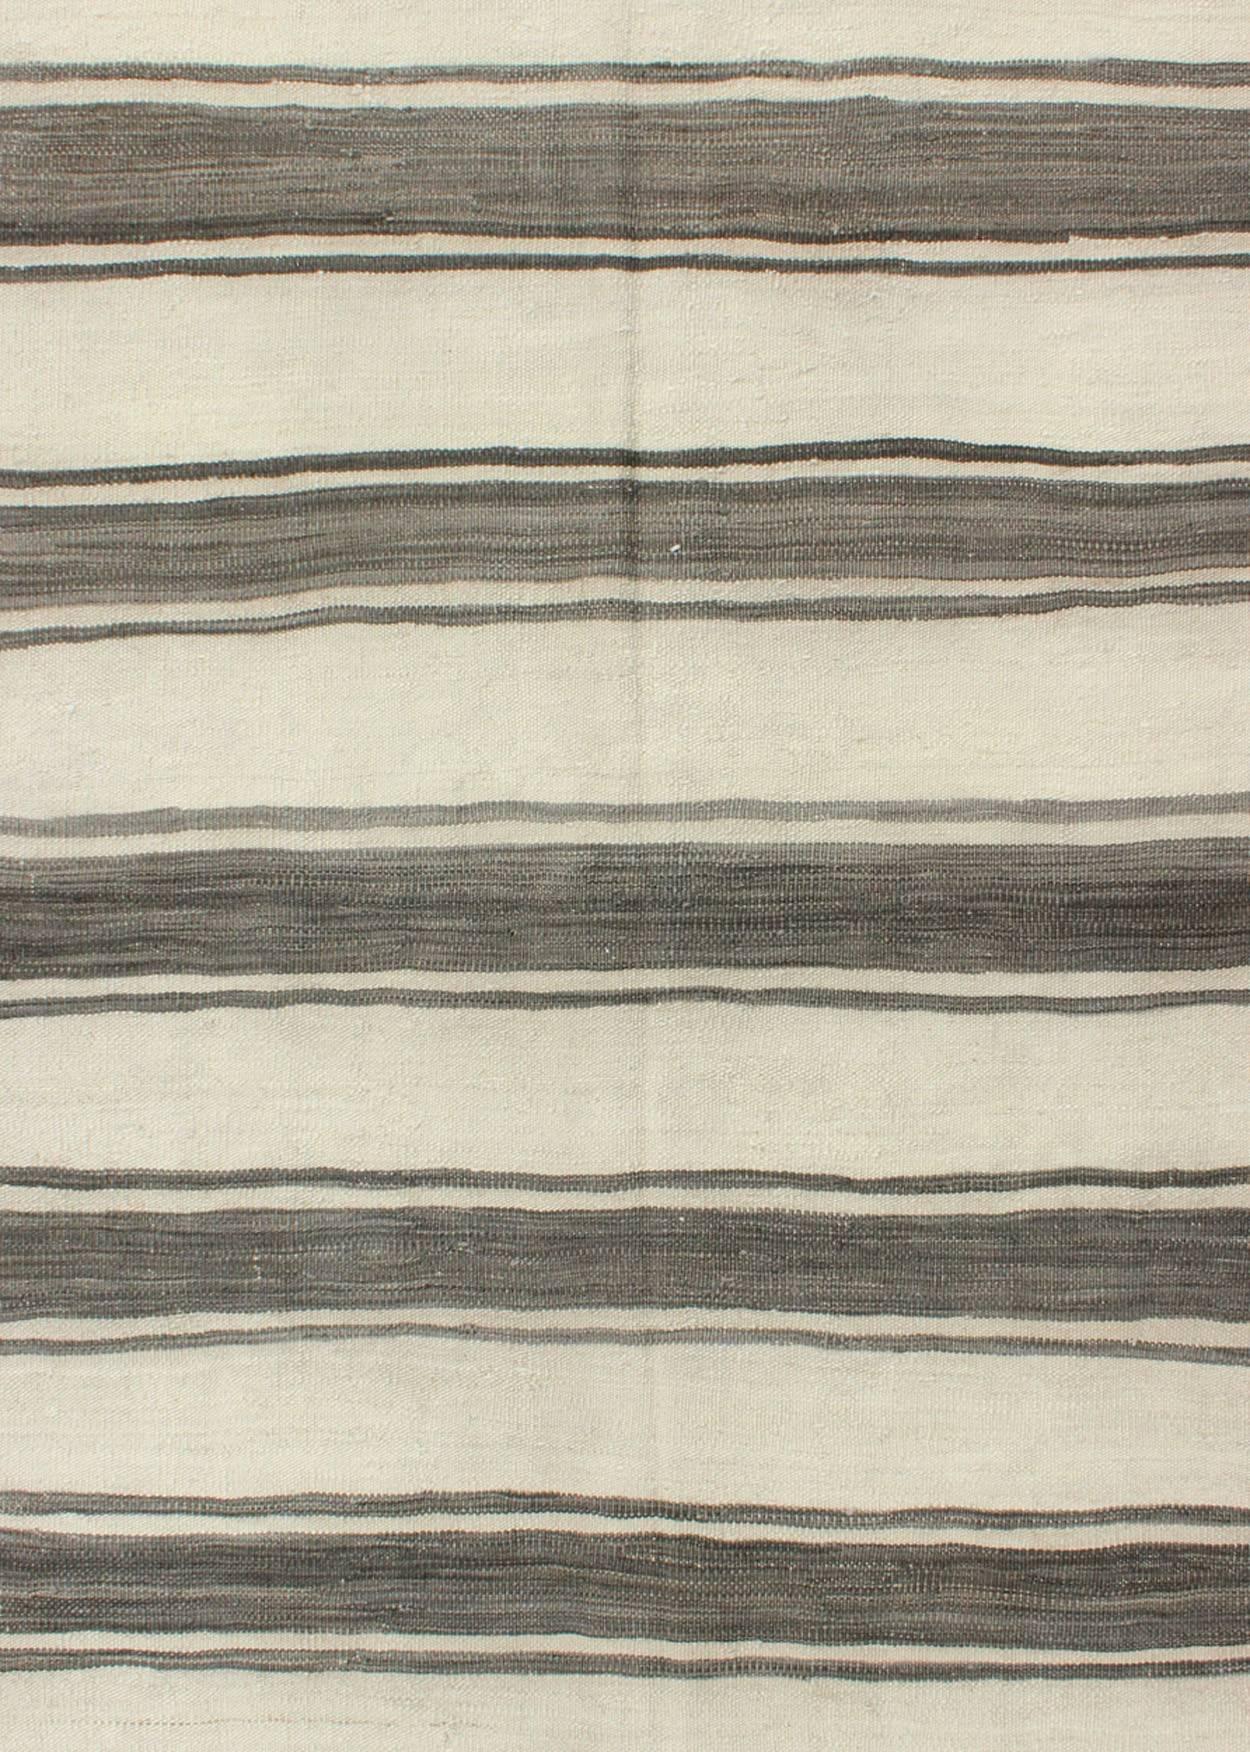 Hand-Woven Vintage Turkish Kilim Rug with Horizontal Gray Stripes and a Modern Design For Sale